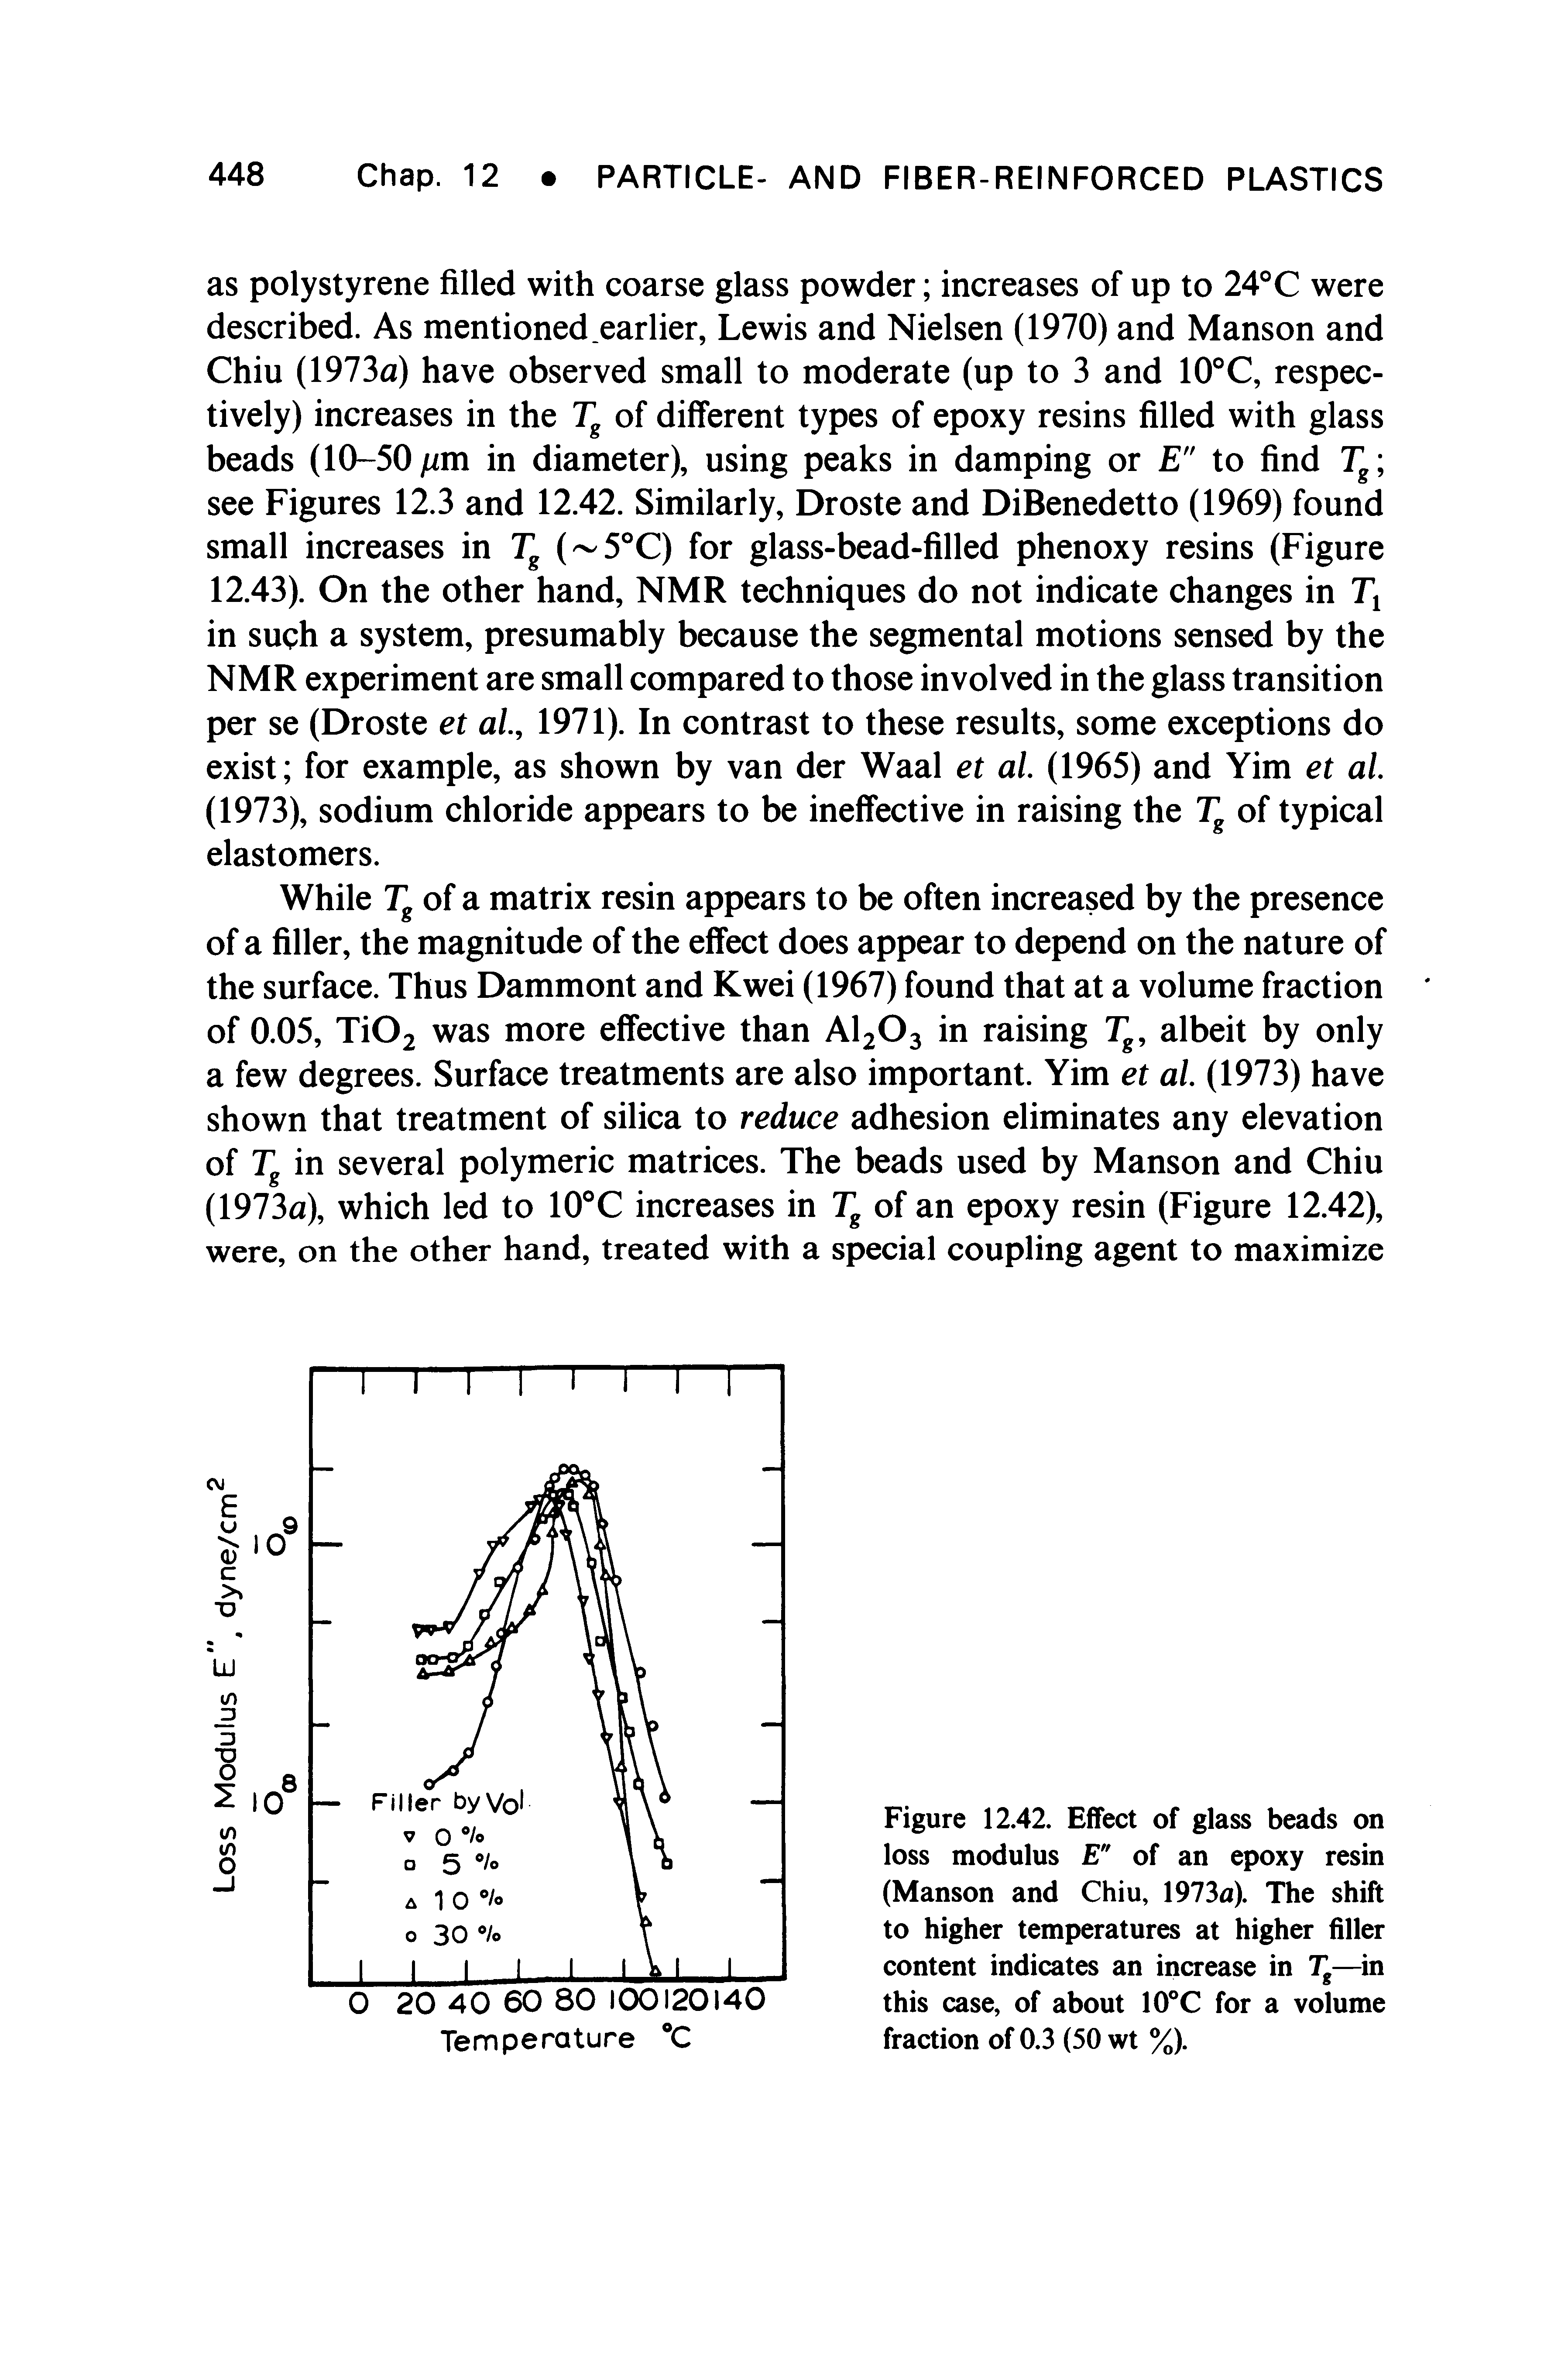 Figure 12.42. Effect of glass beads on loss modulus E" of an epoxy resin (Manson and Chiu, 1973n). The shift to higher temperatures at higher filler content indicates an increase in 7 —in this case, of about 10°C for a volume fraction of 0.3 (50 wt %).